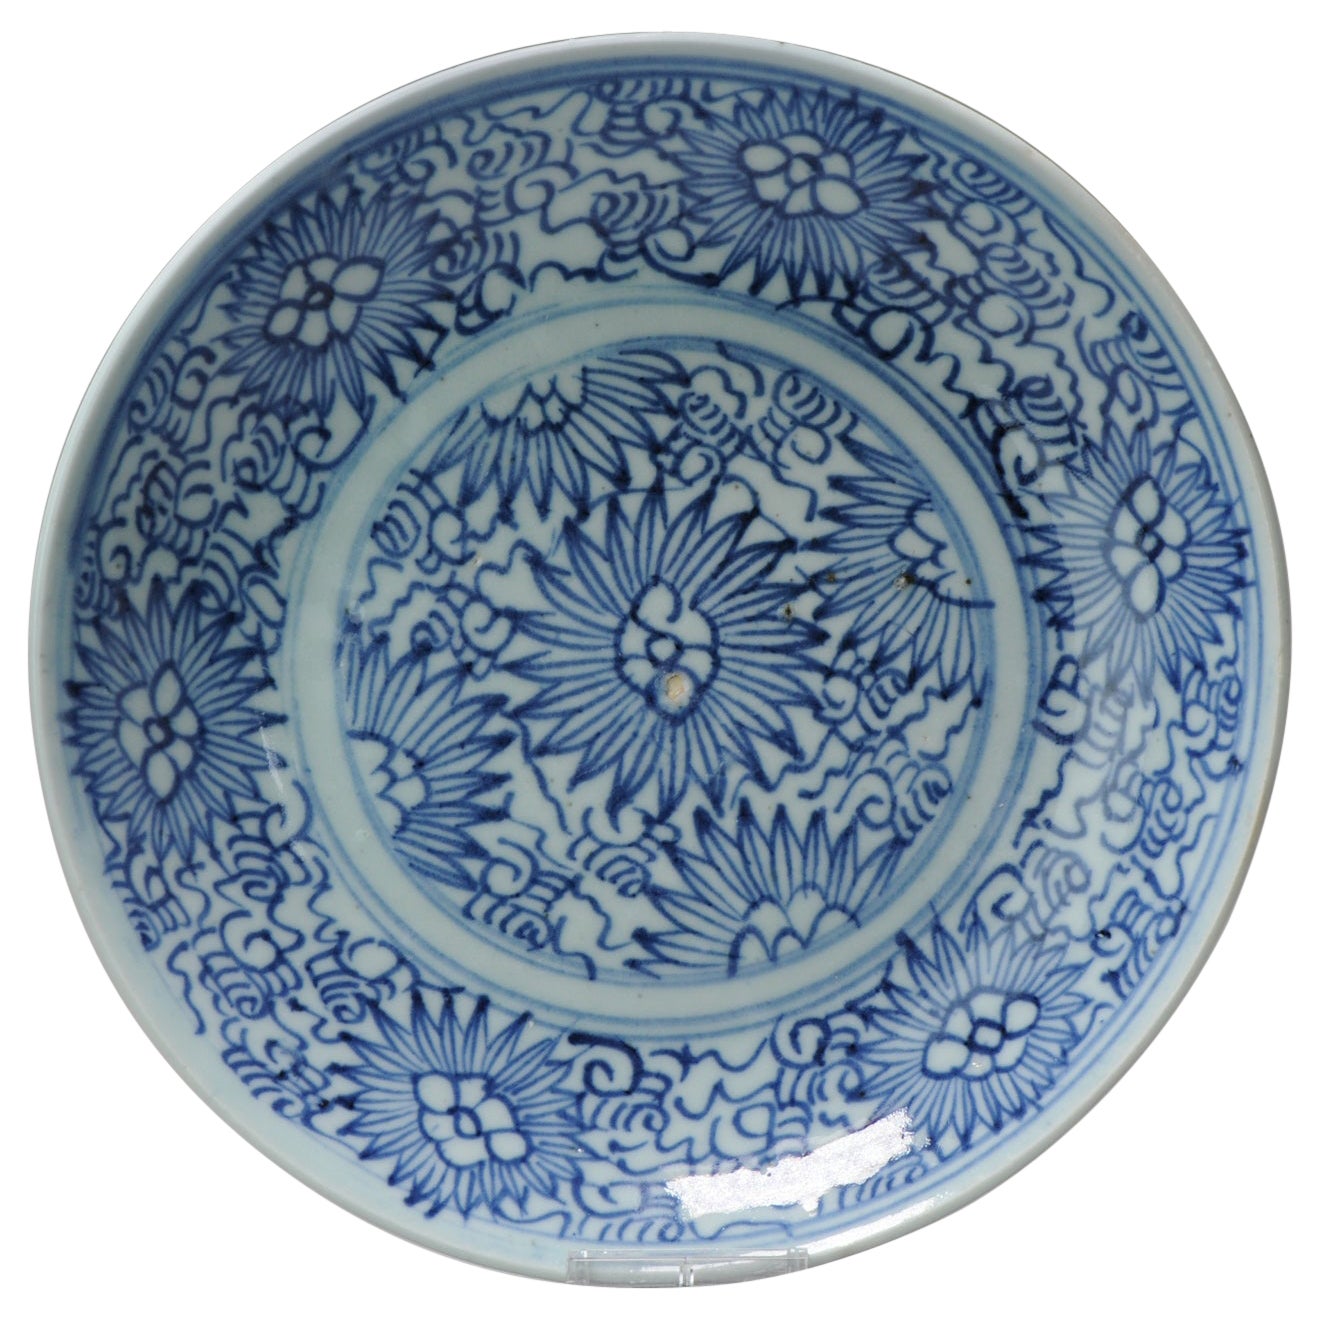 Aster Pattern Chinese Porcelain kitchen Ching Qing Plate South East Asia, 19th C